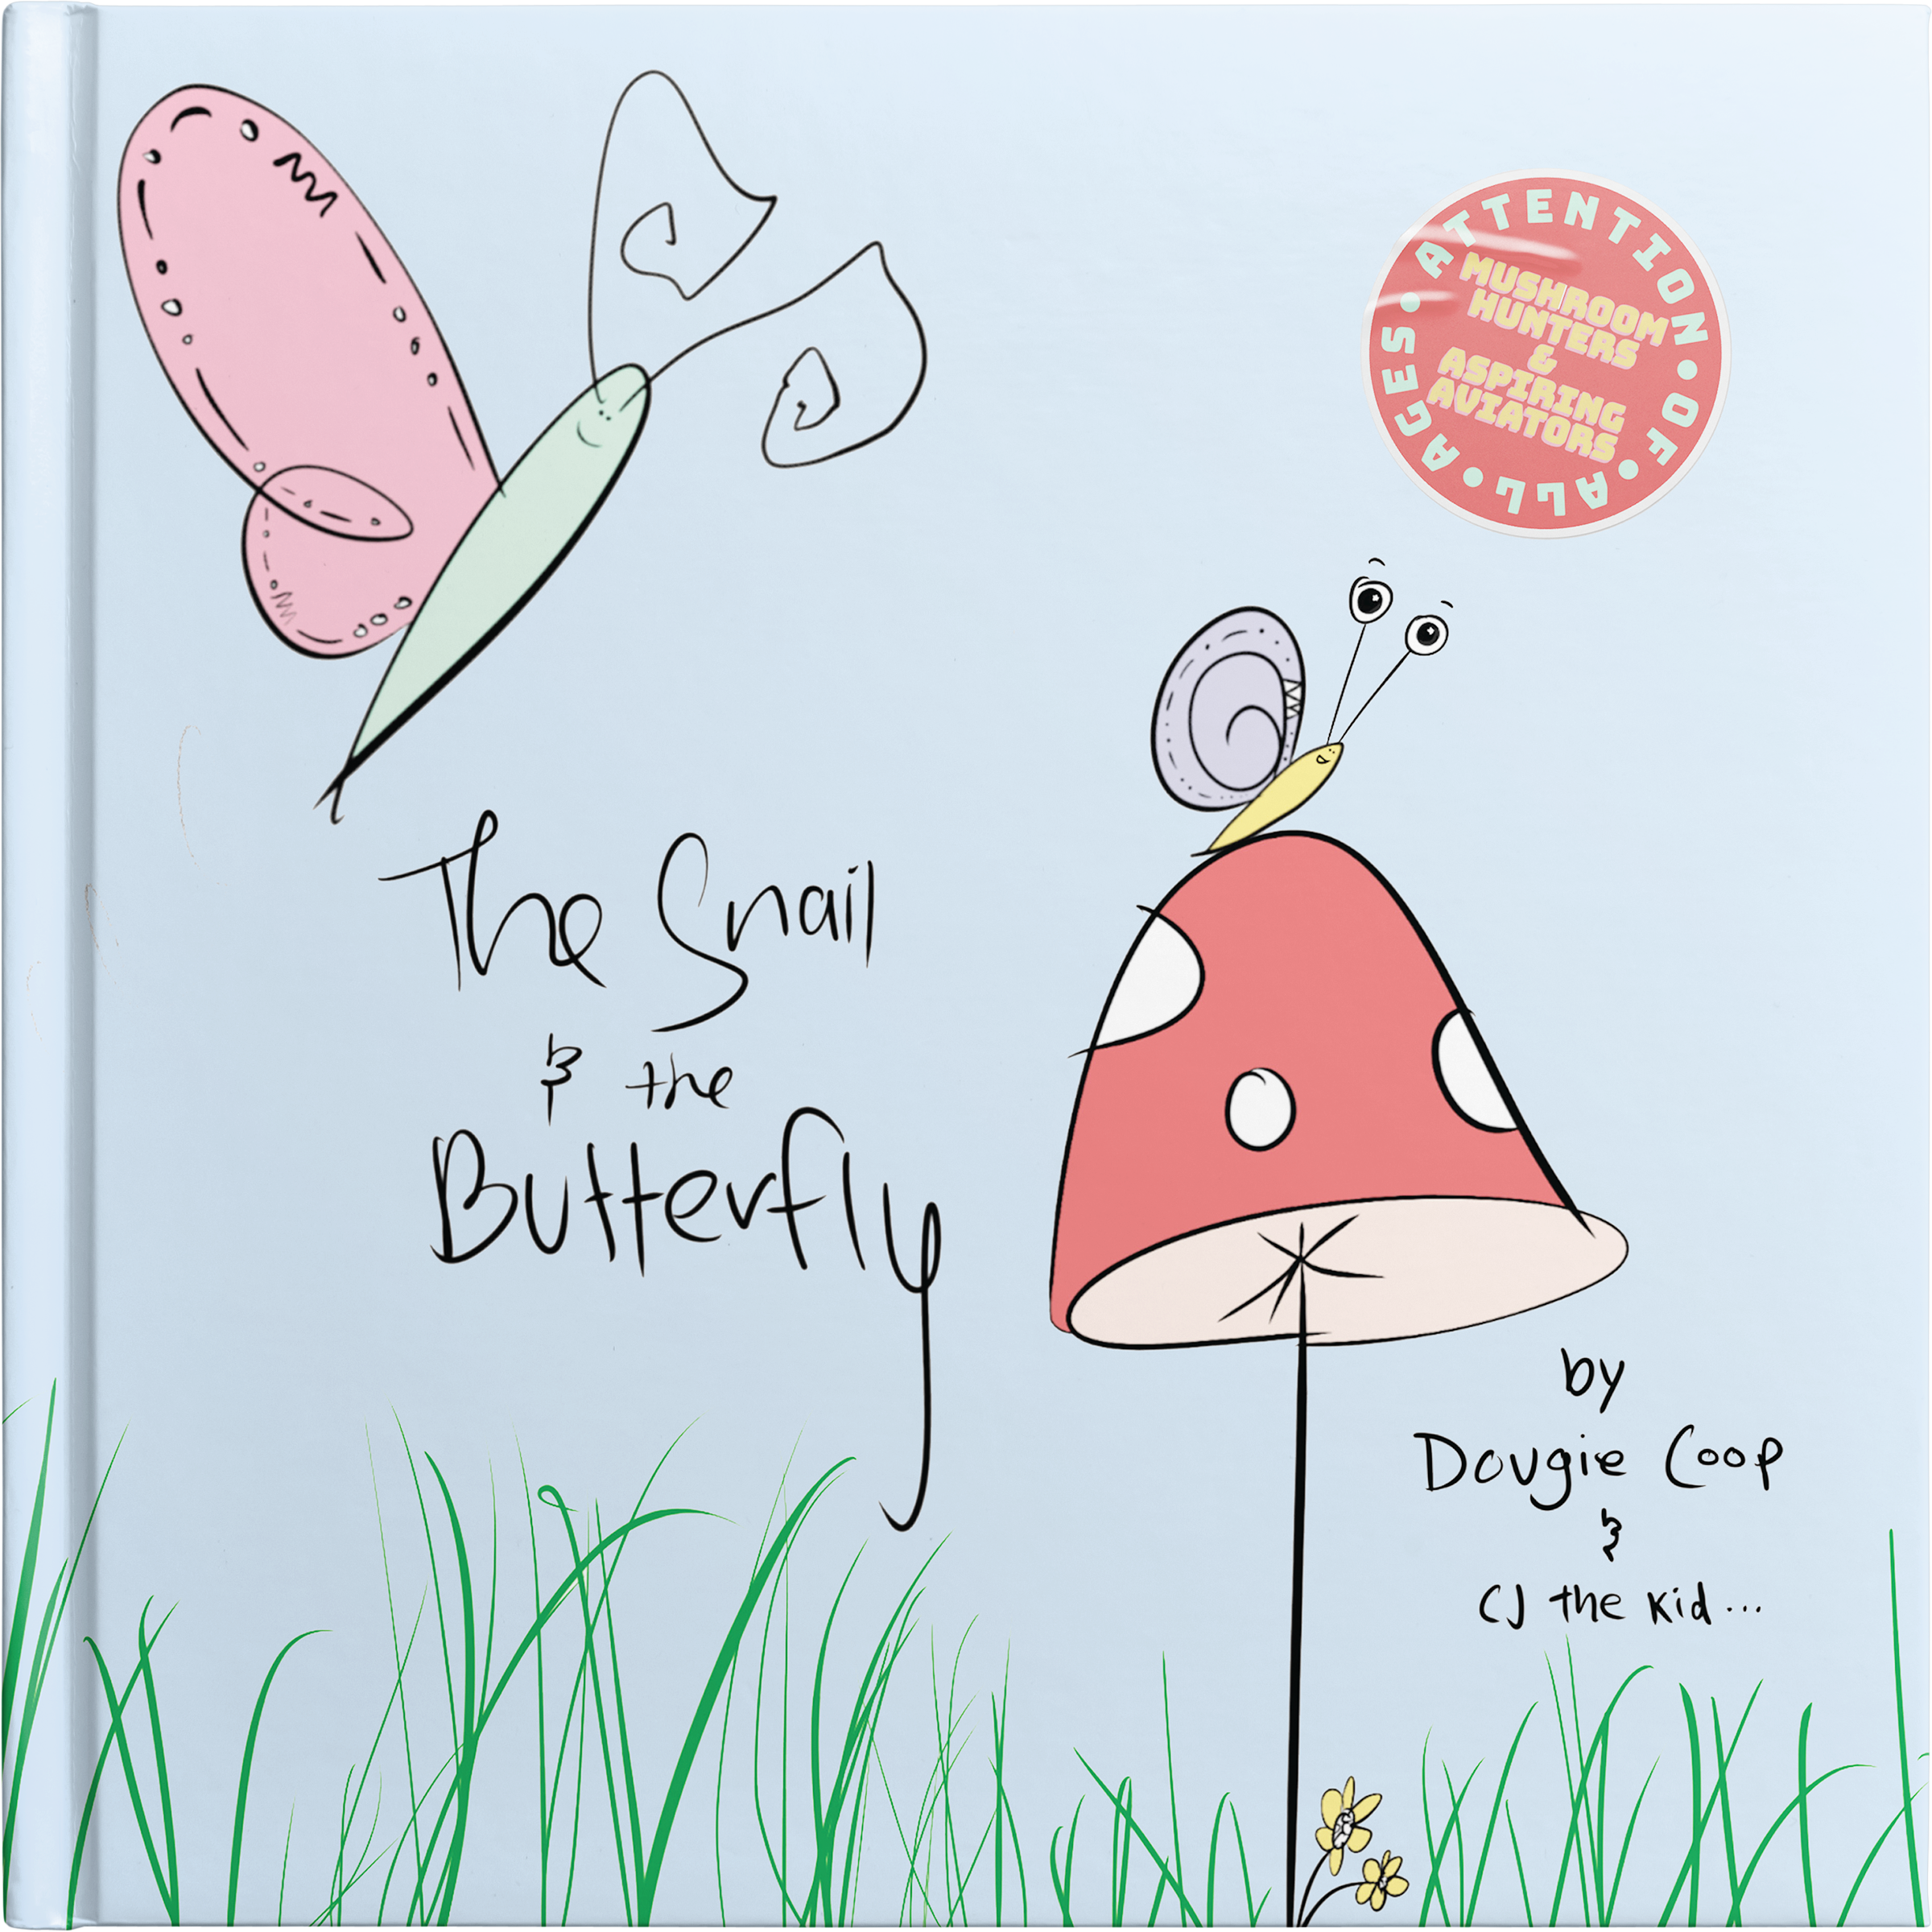 Inspirational Children's Books - The Snail & the Butterfly by Dougie Coop